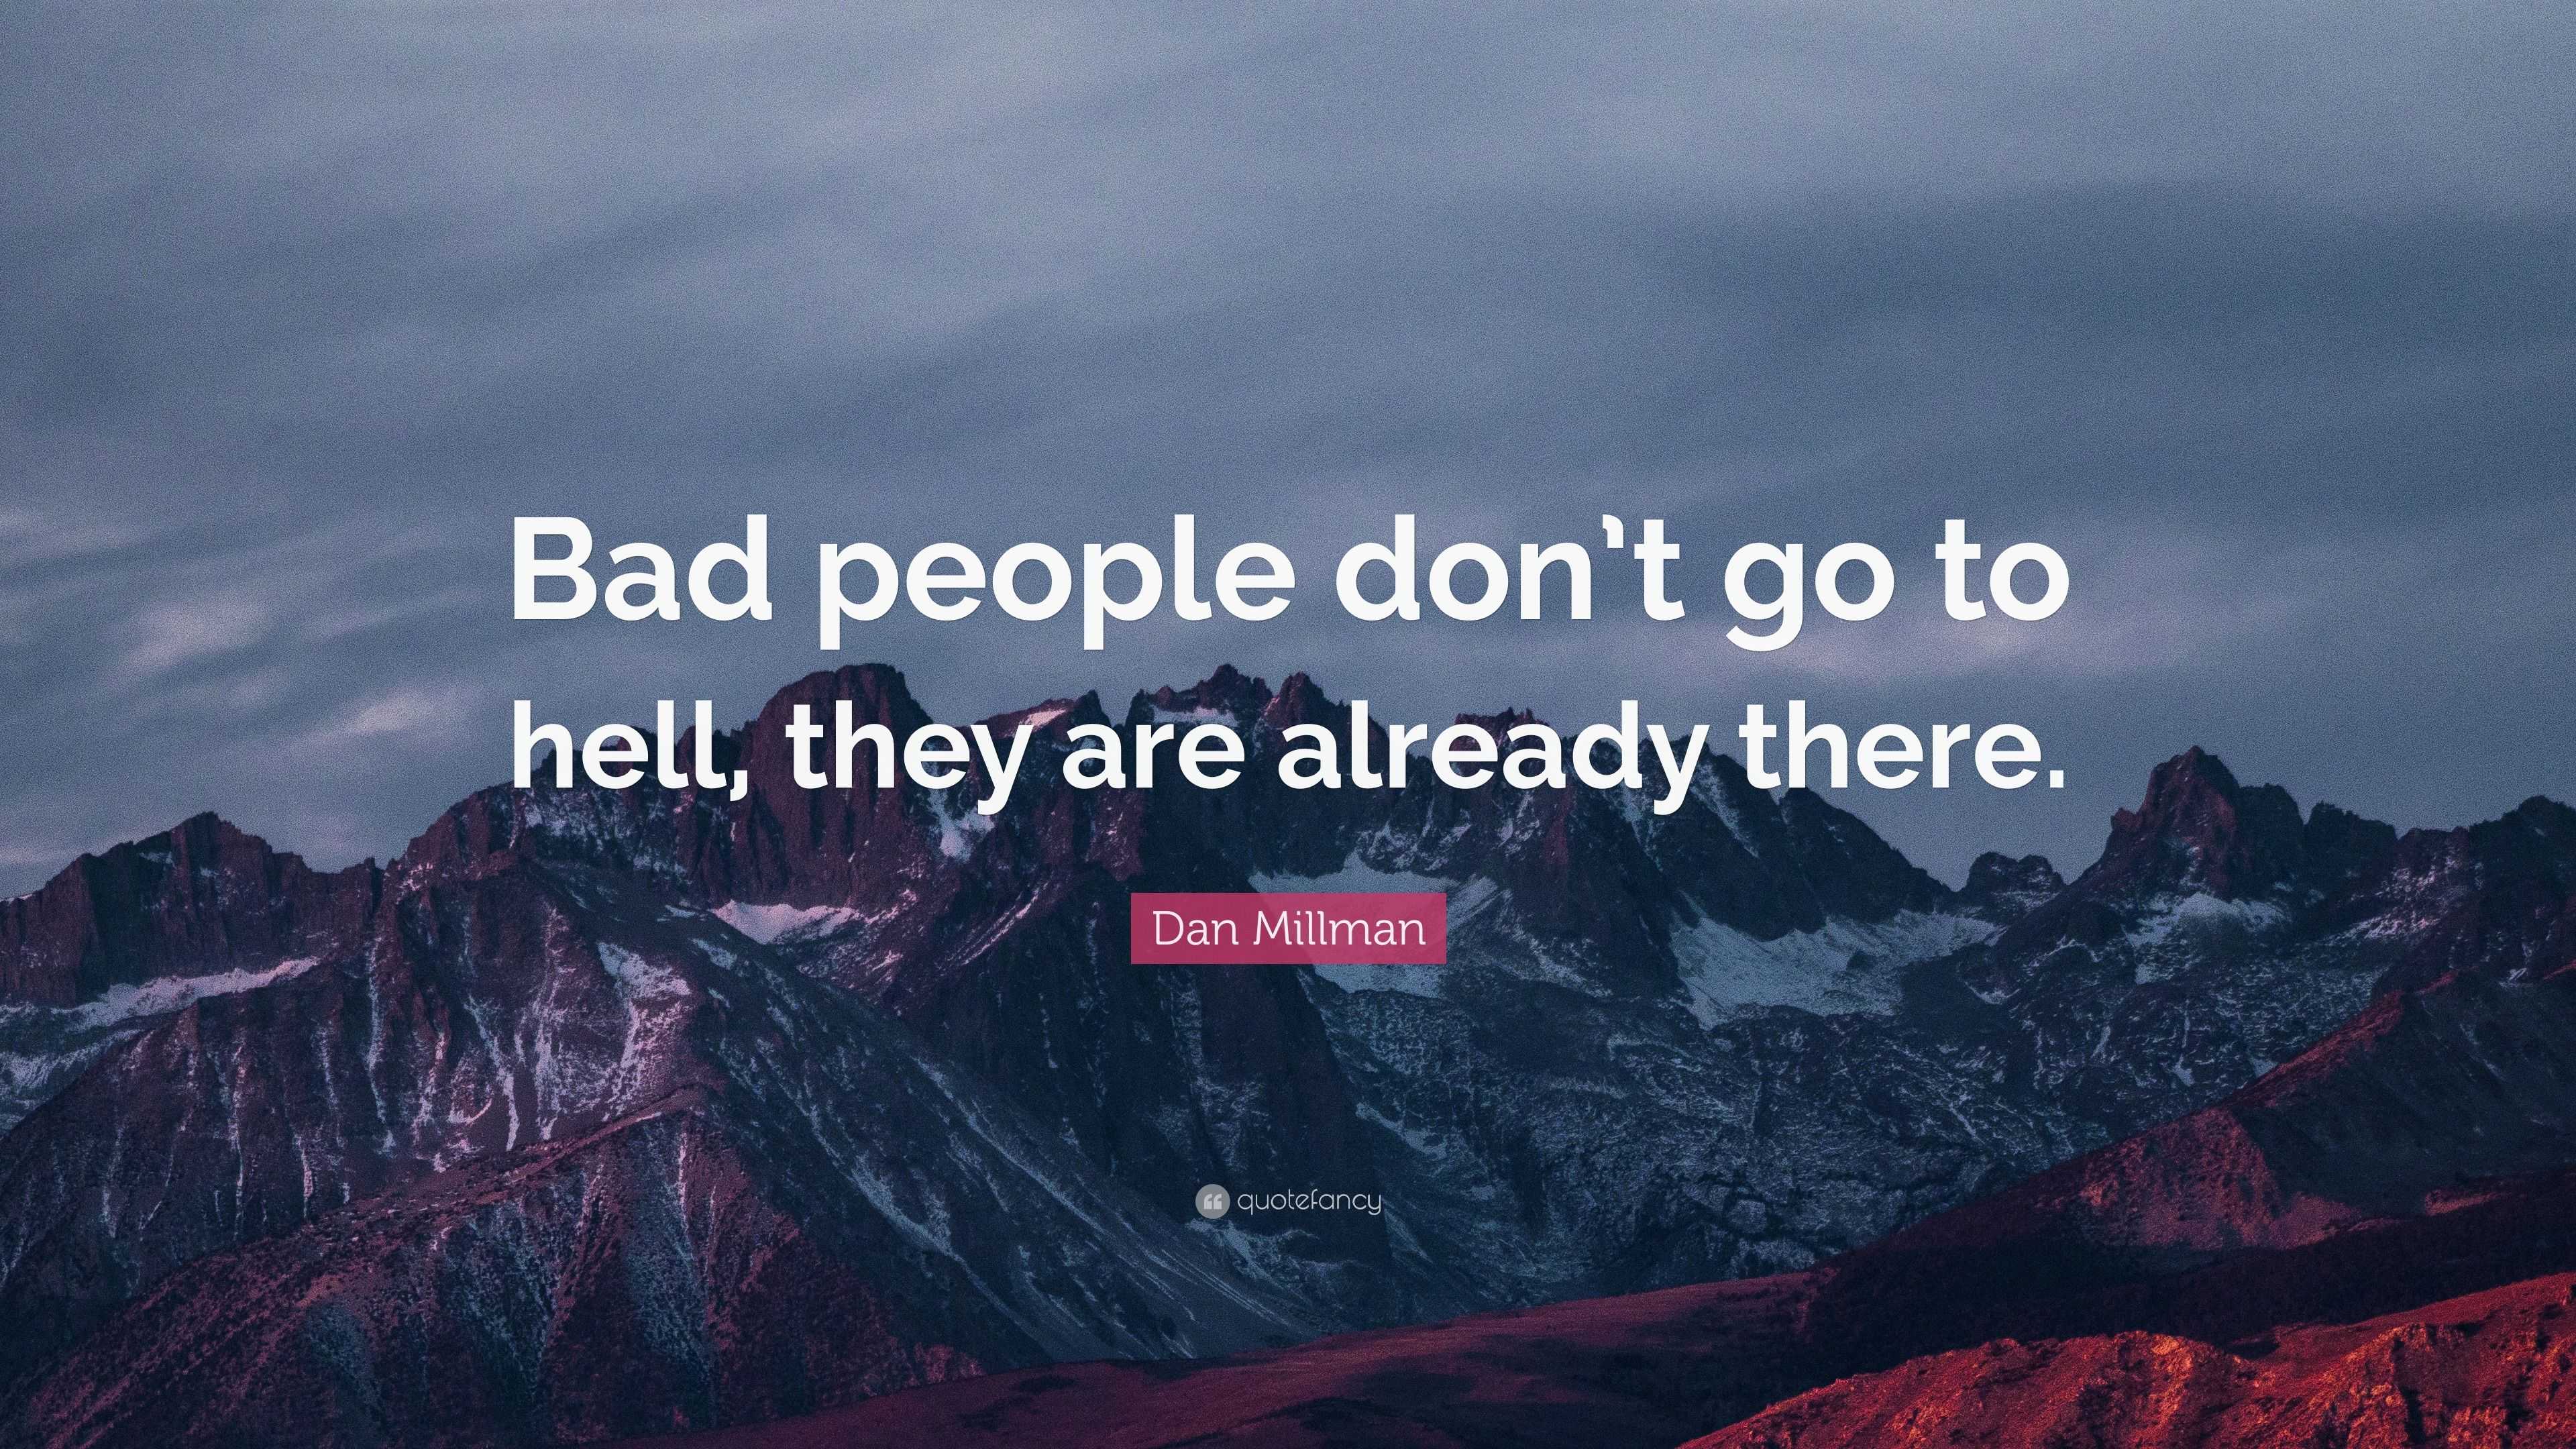 Dan Millman Quote: “Bad people don't go to hell, they are already